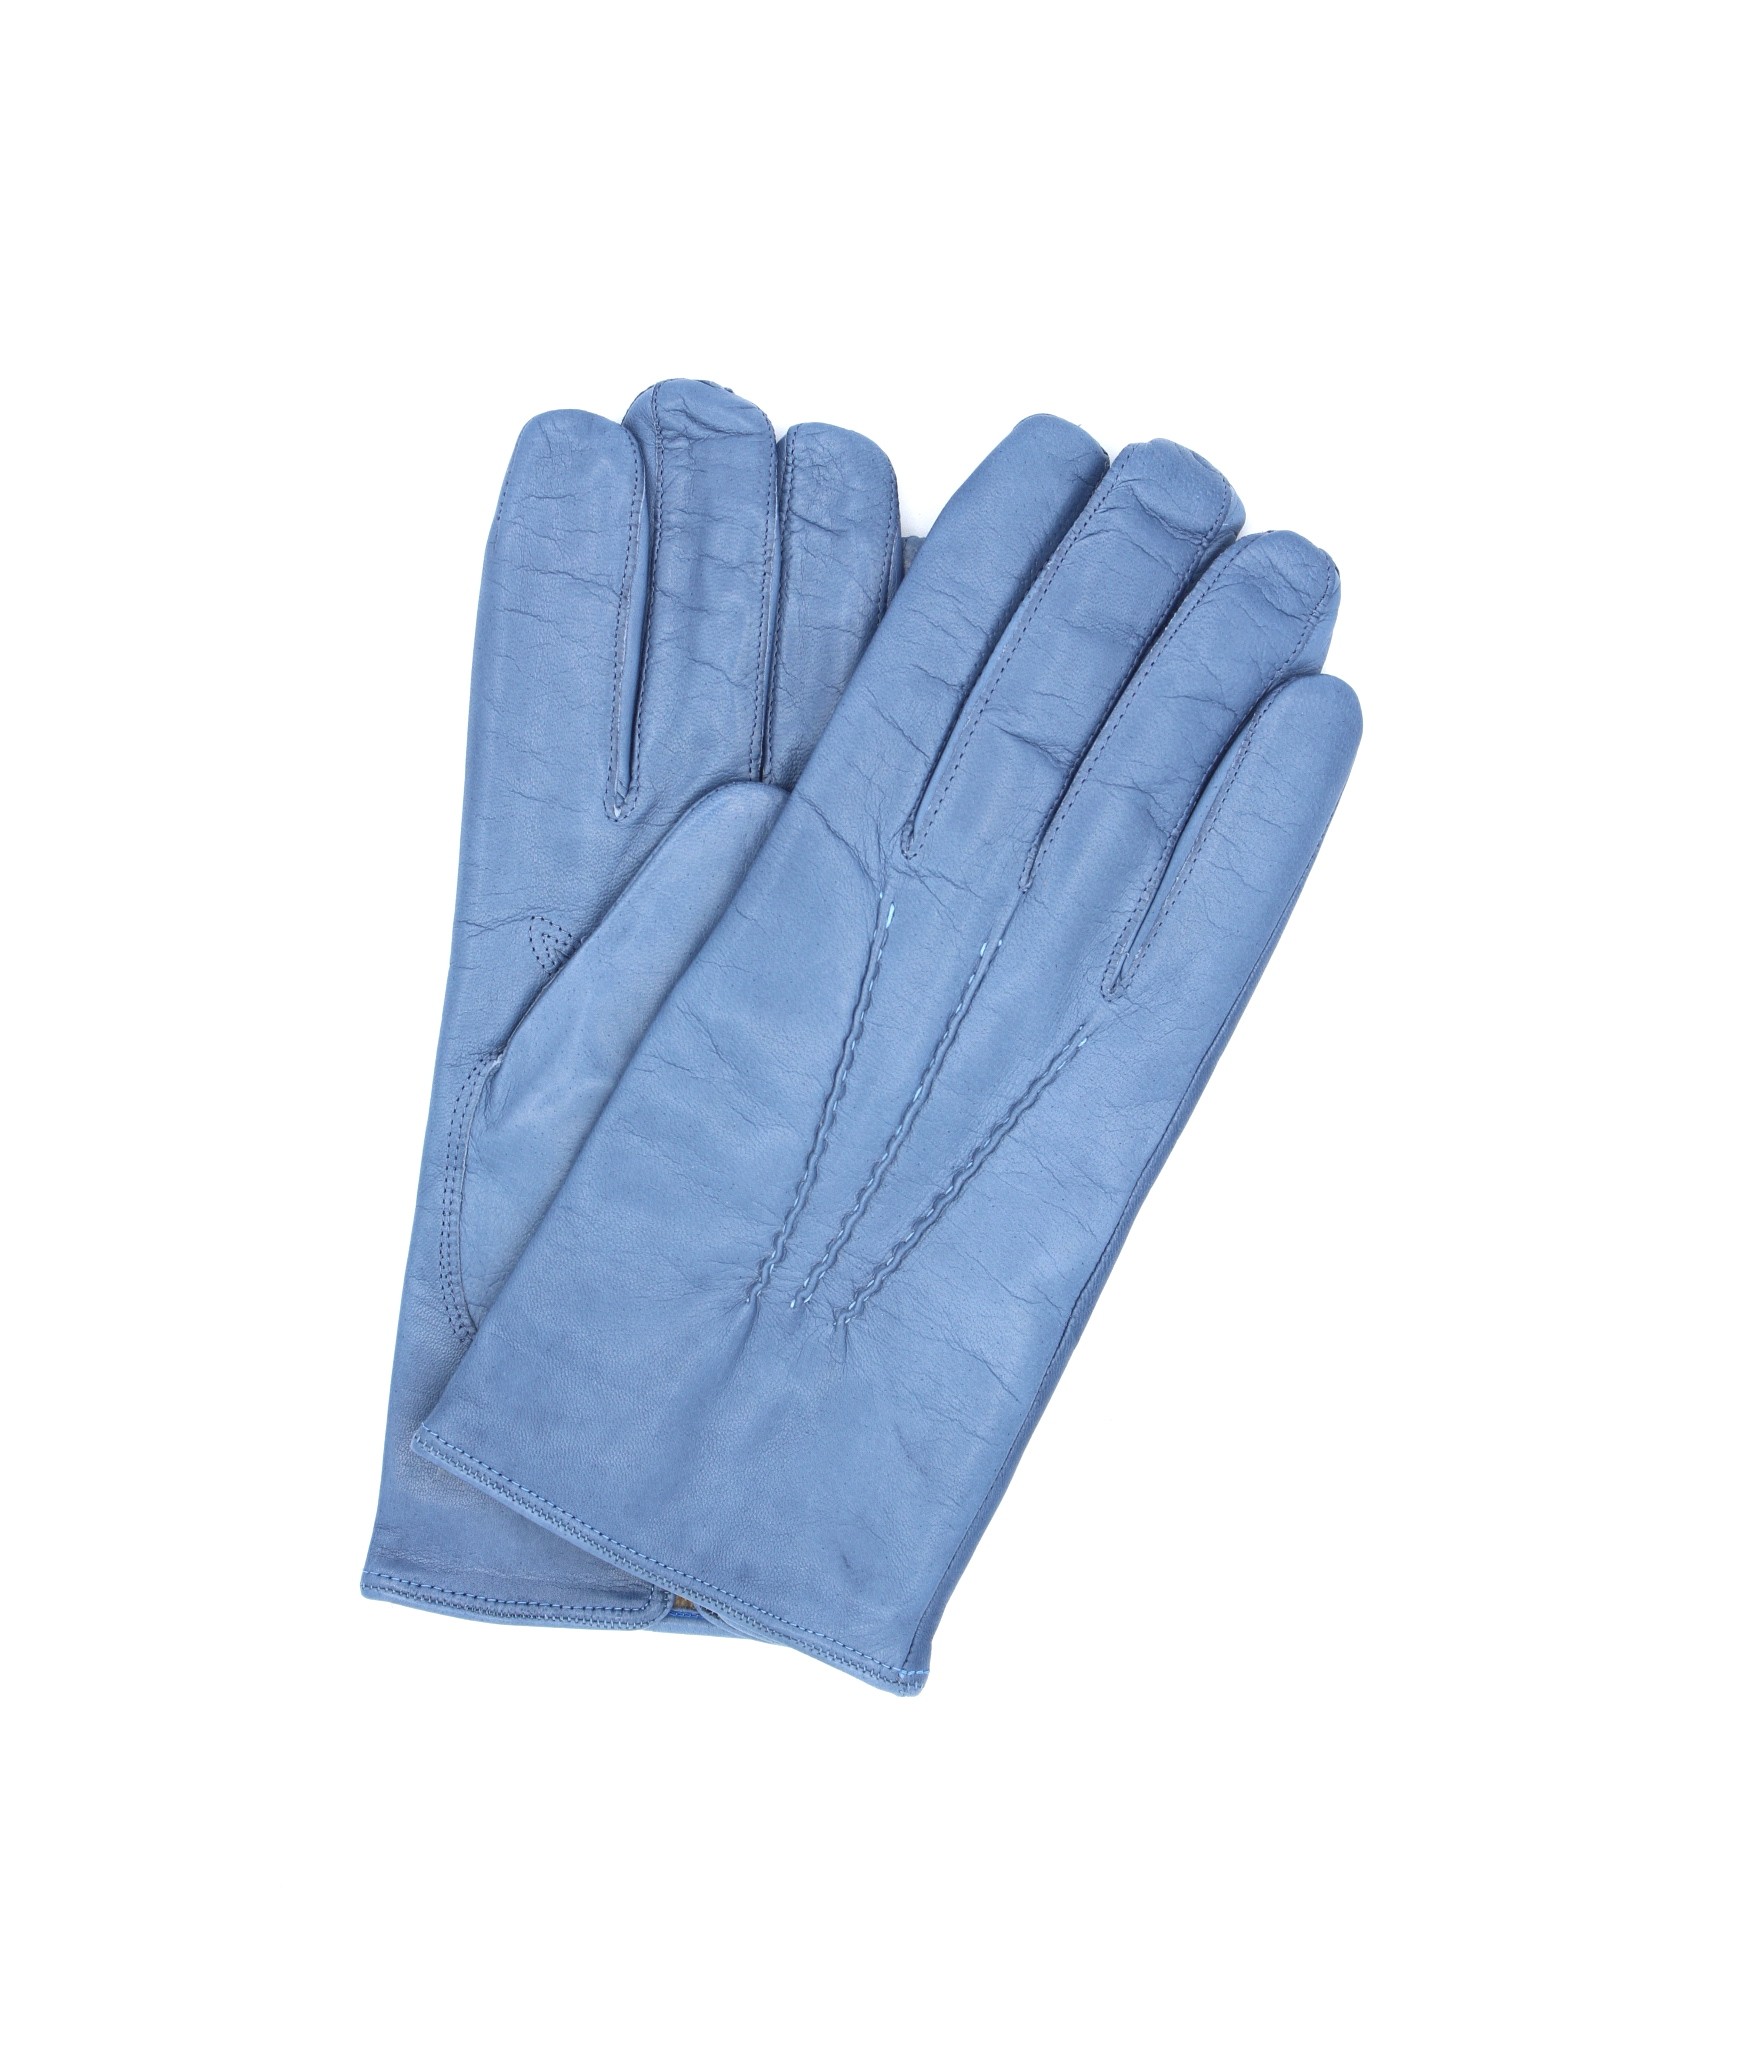 Uomo Classic Nappa leather gloves cashmere lined Denim